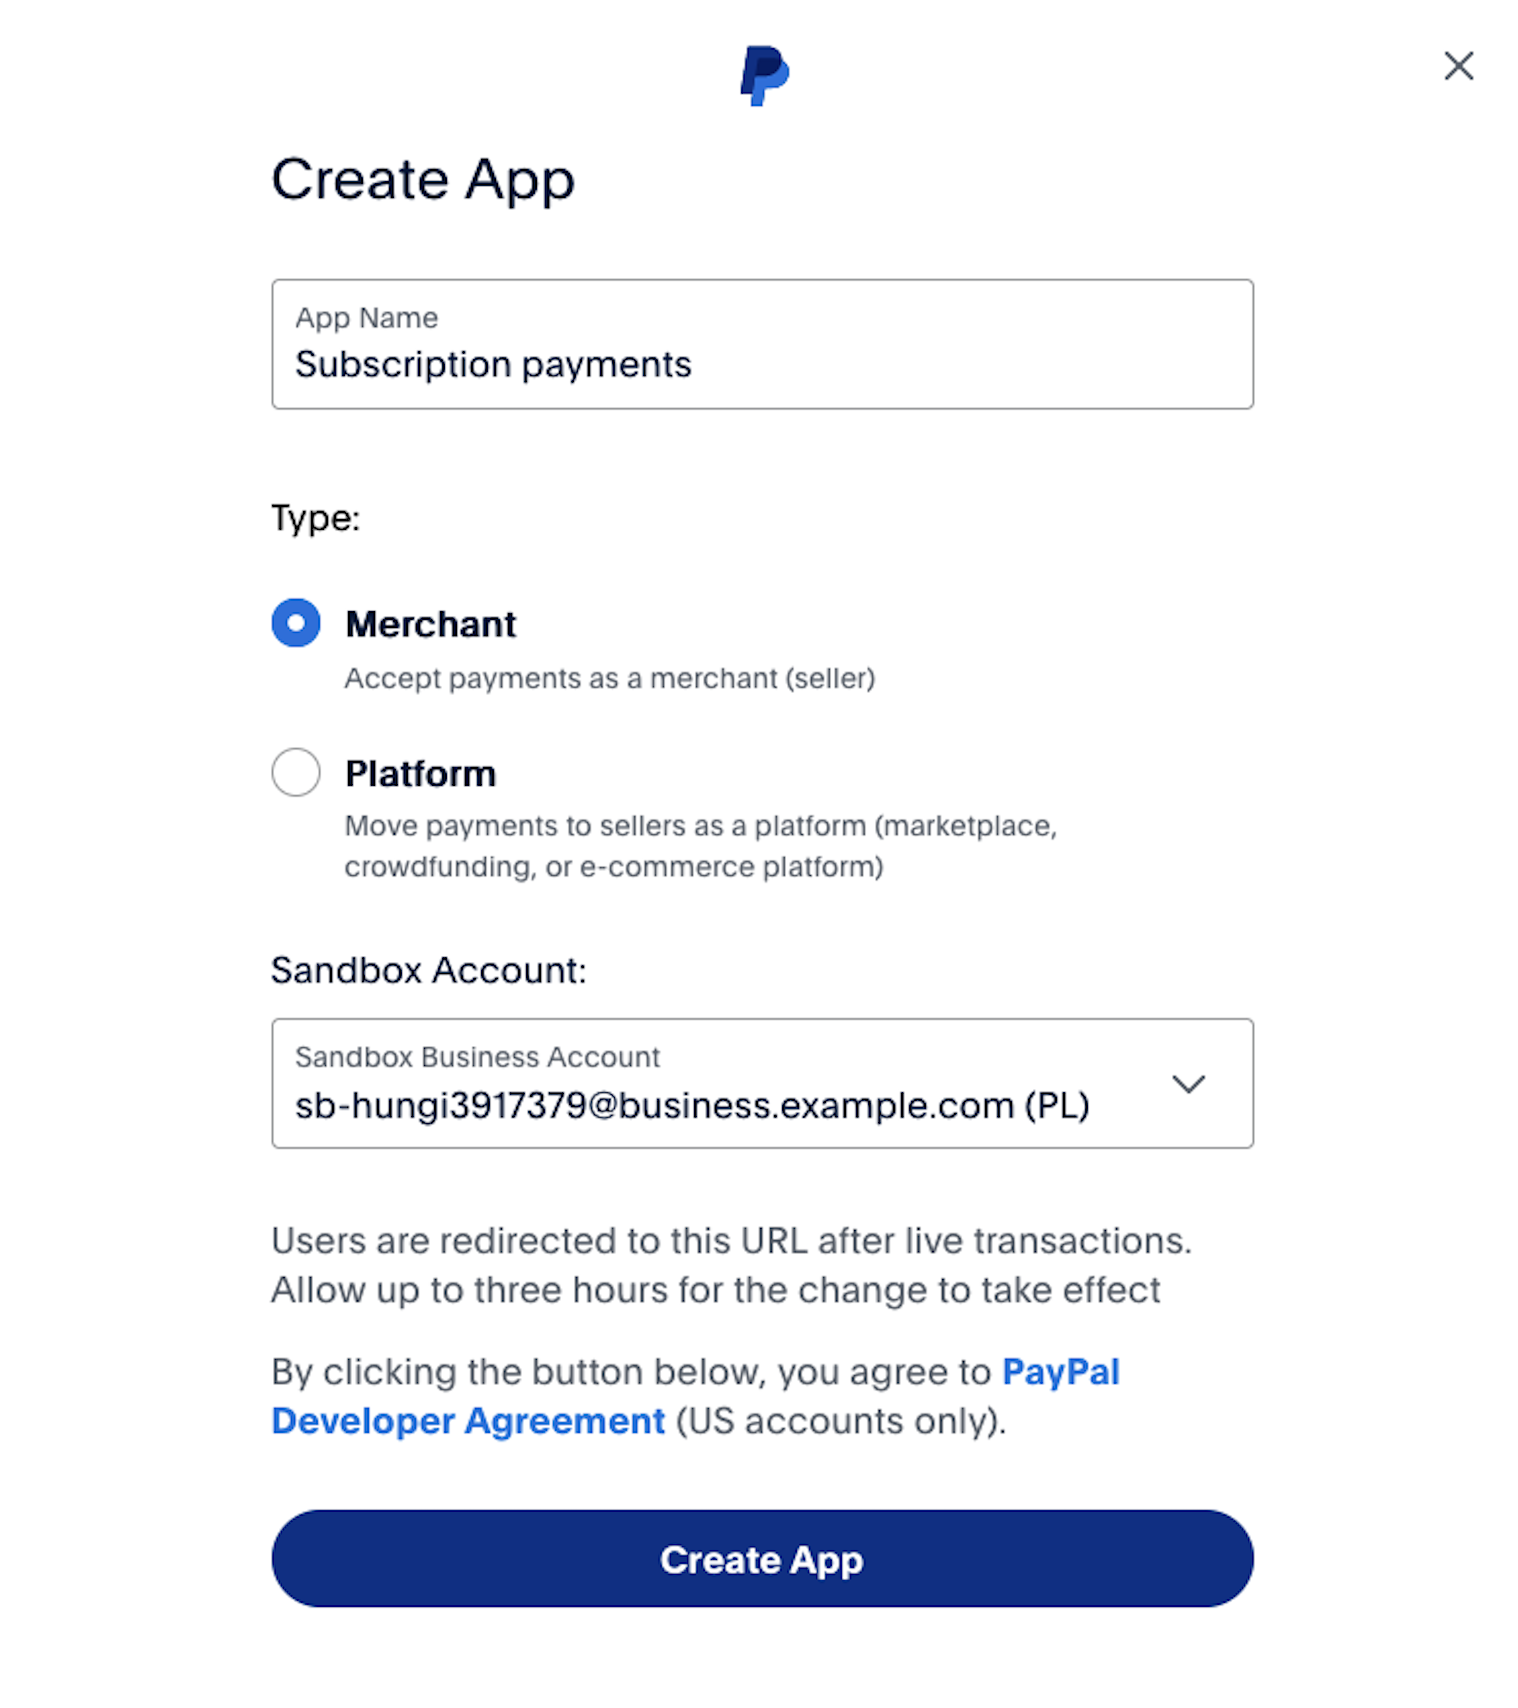  You can create a new application for an online store or marketplace platform in your PayPal account.